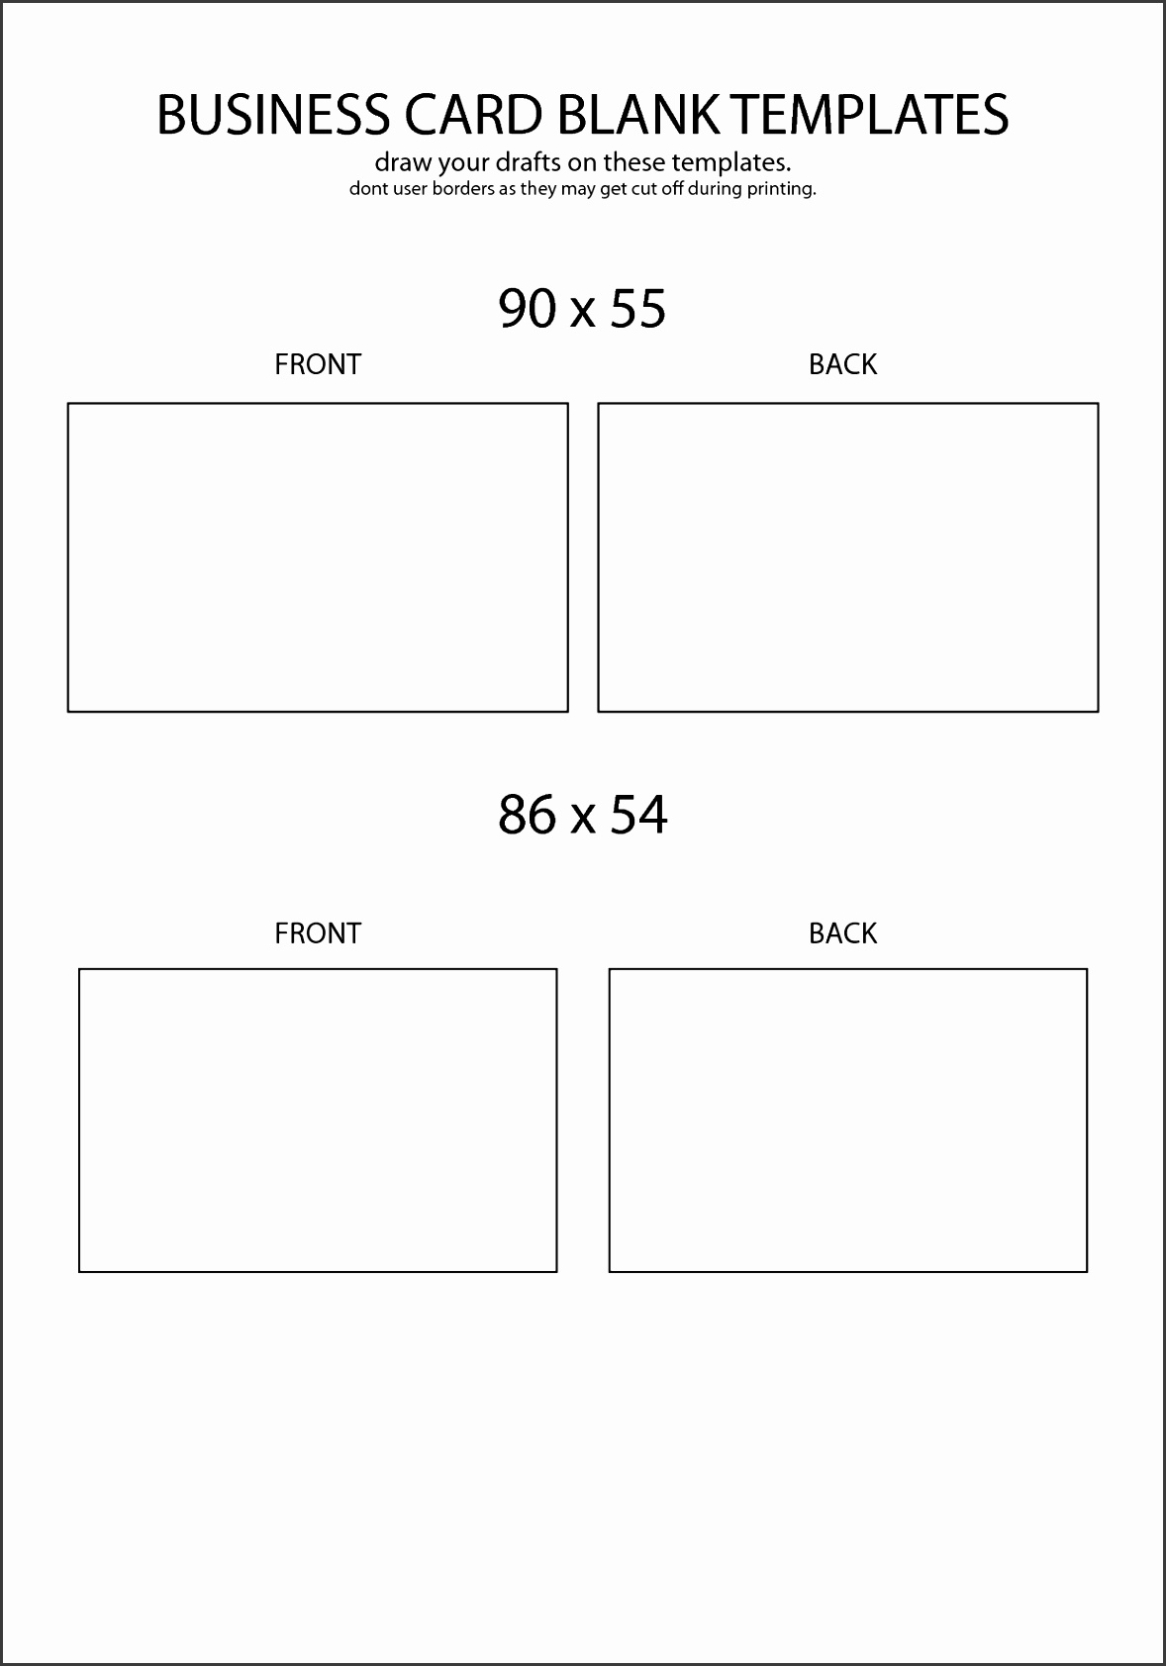 8 Blank Business Card Template Word 2013 - Sampletemplatess with regard to Plain Business Card Template Microsoft Word